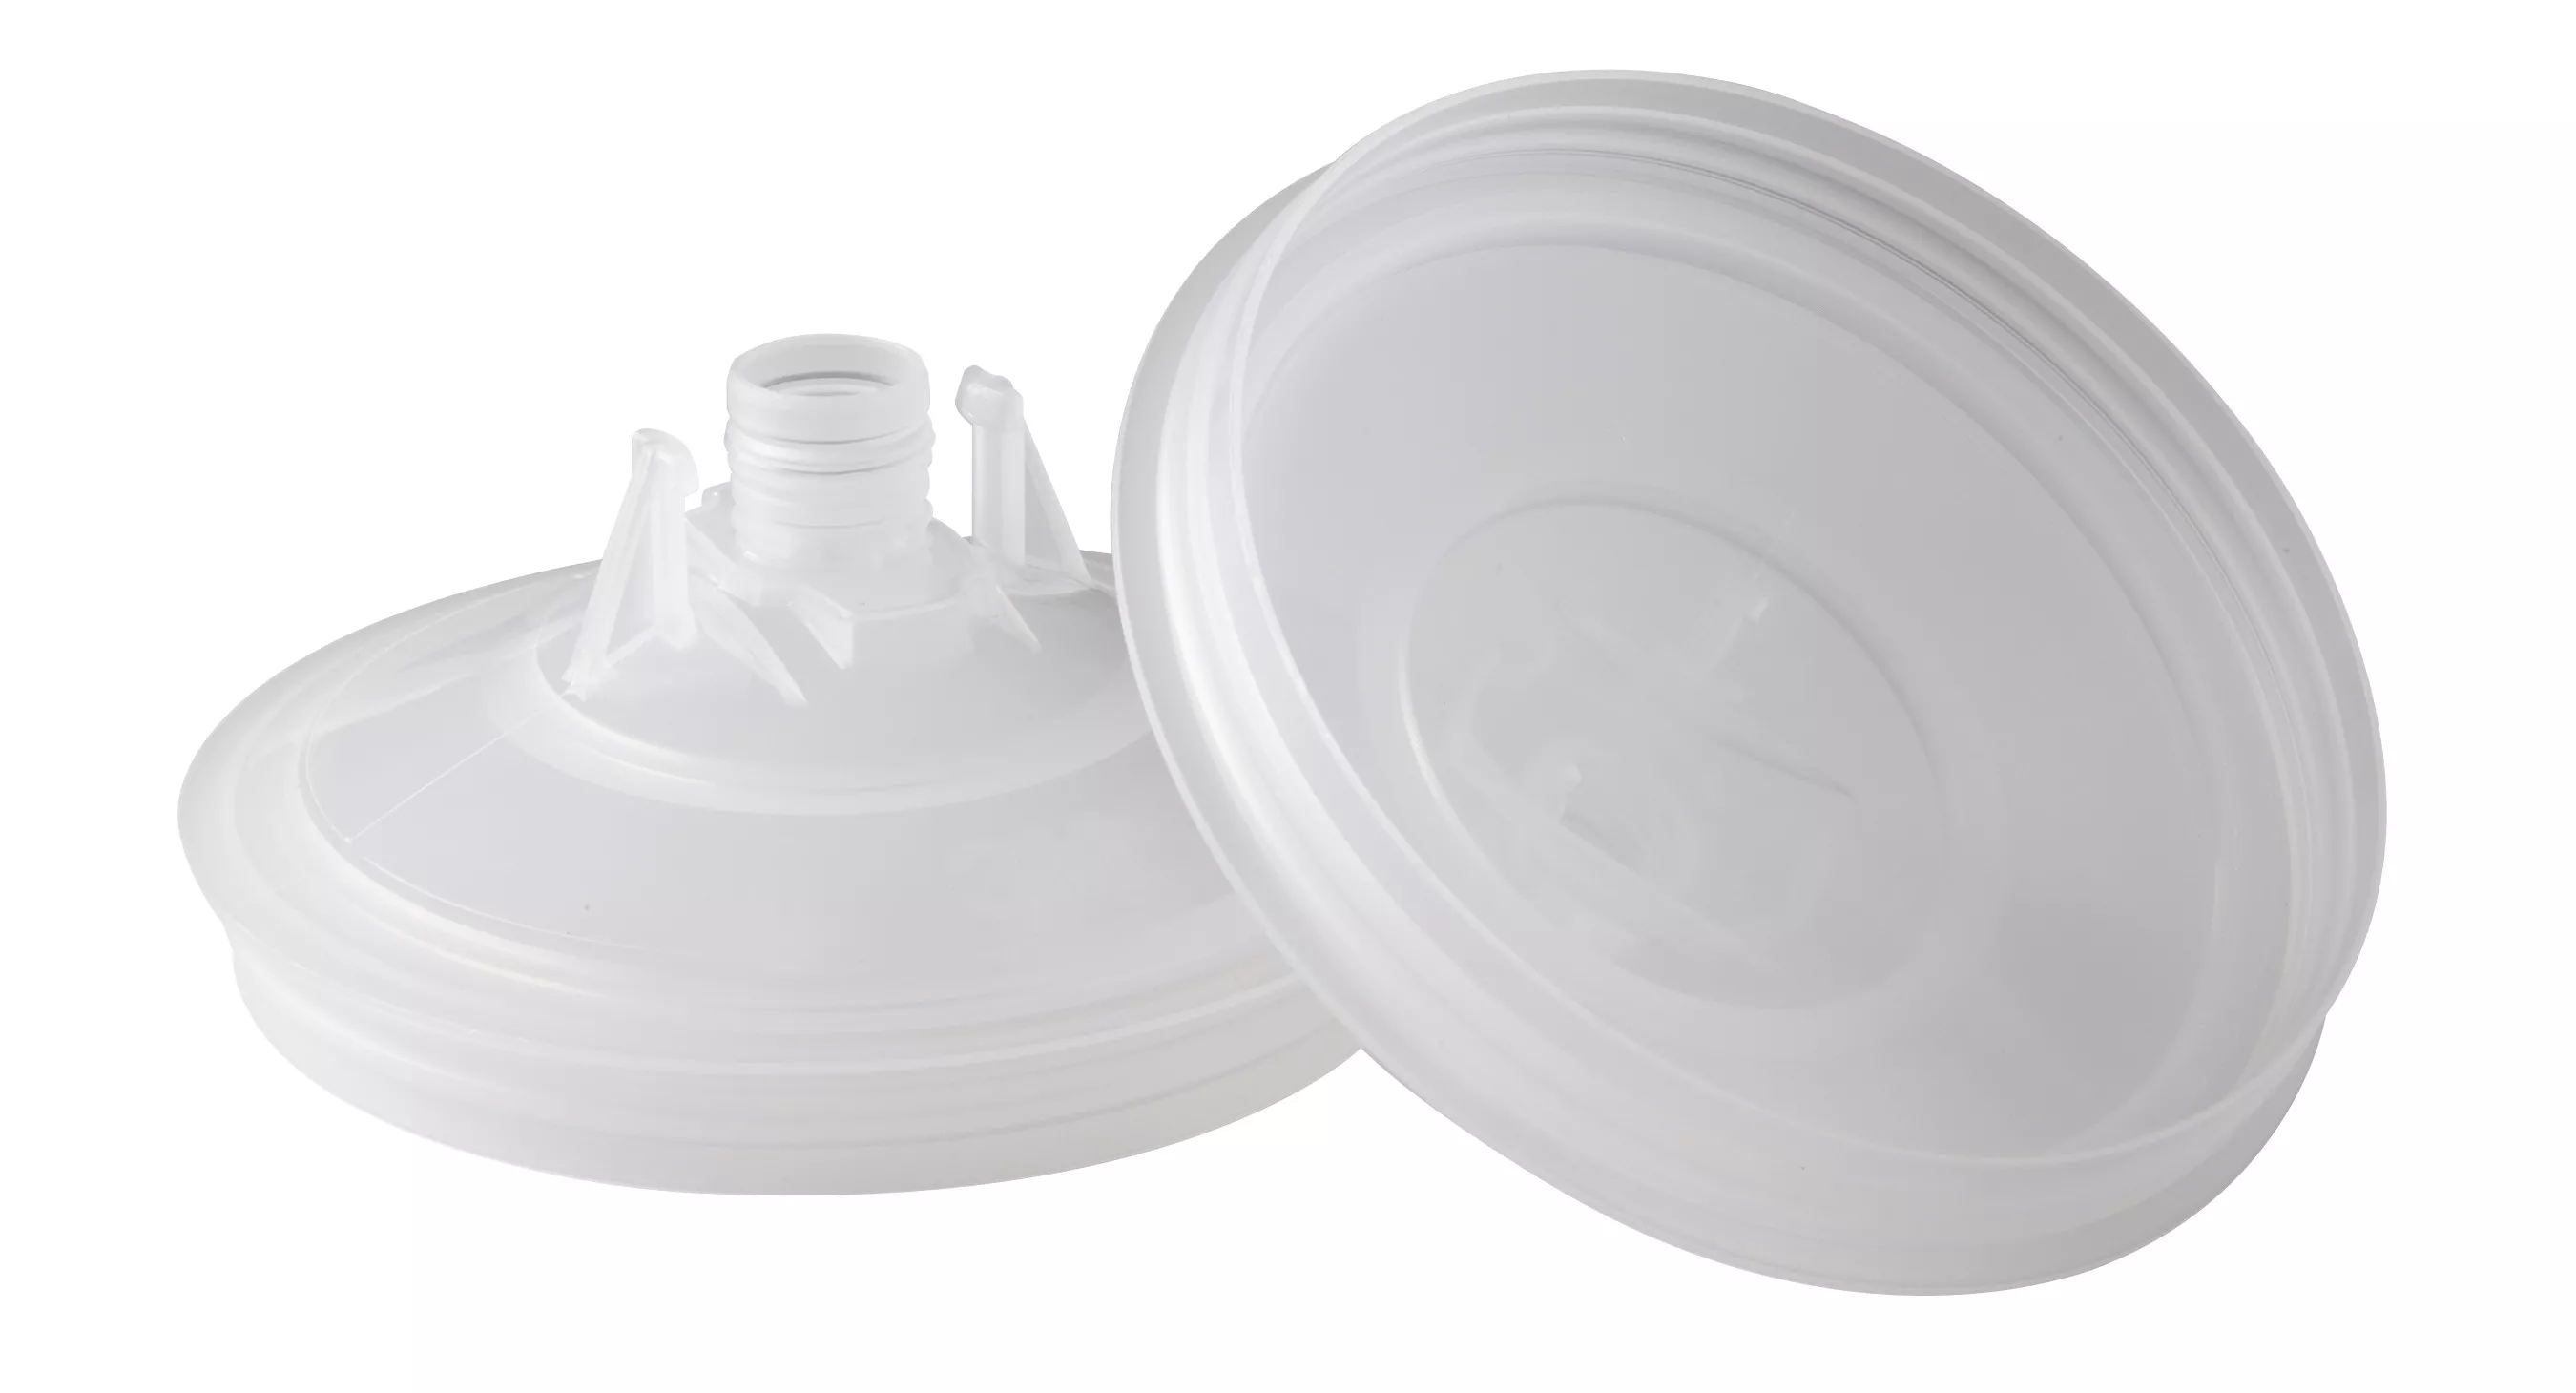 3M™ PPS™ Disposable Lids 16199, Standard and Large, 125 Micron Filter,
25 Lids/Case